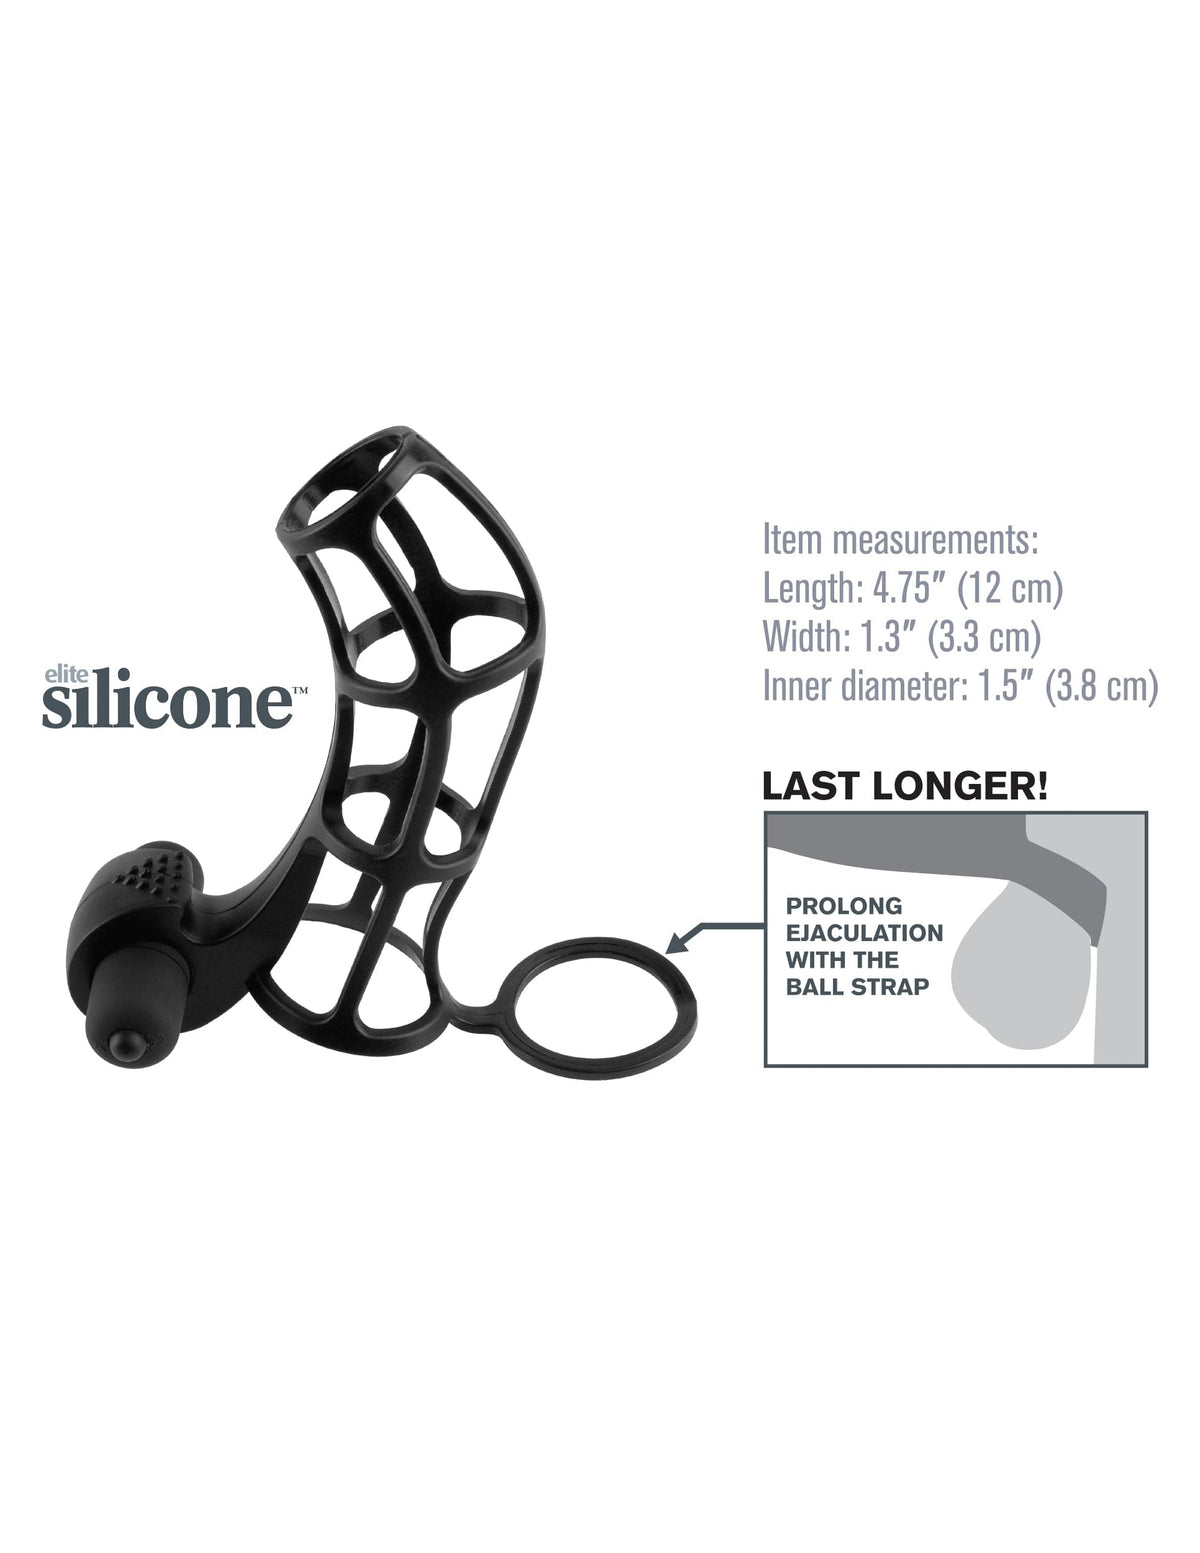 fantasy x tensions deluxe silicone power cage black